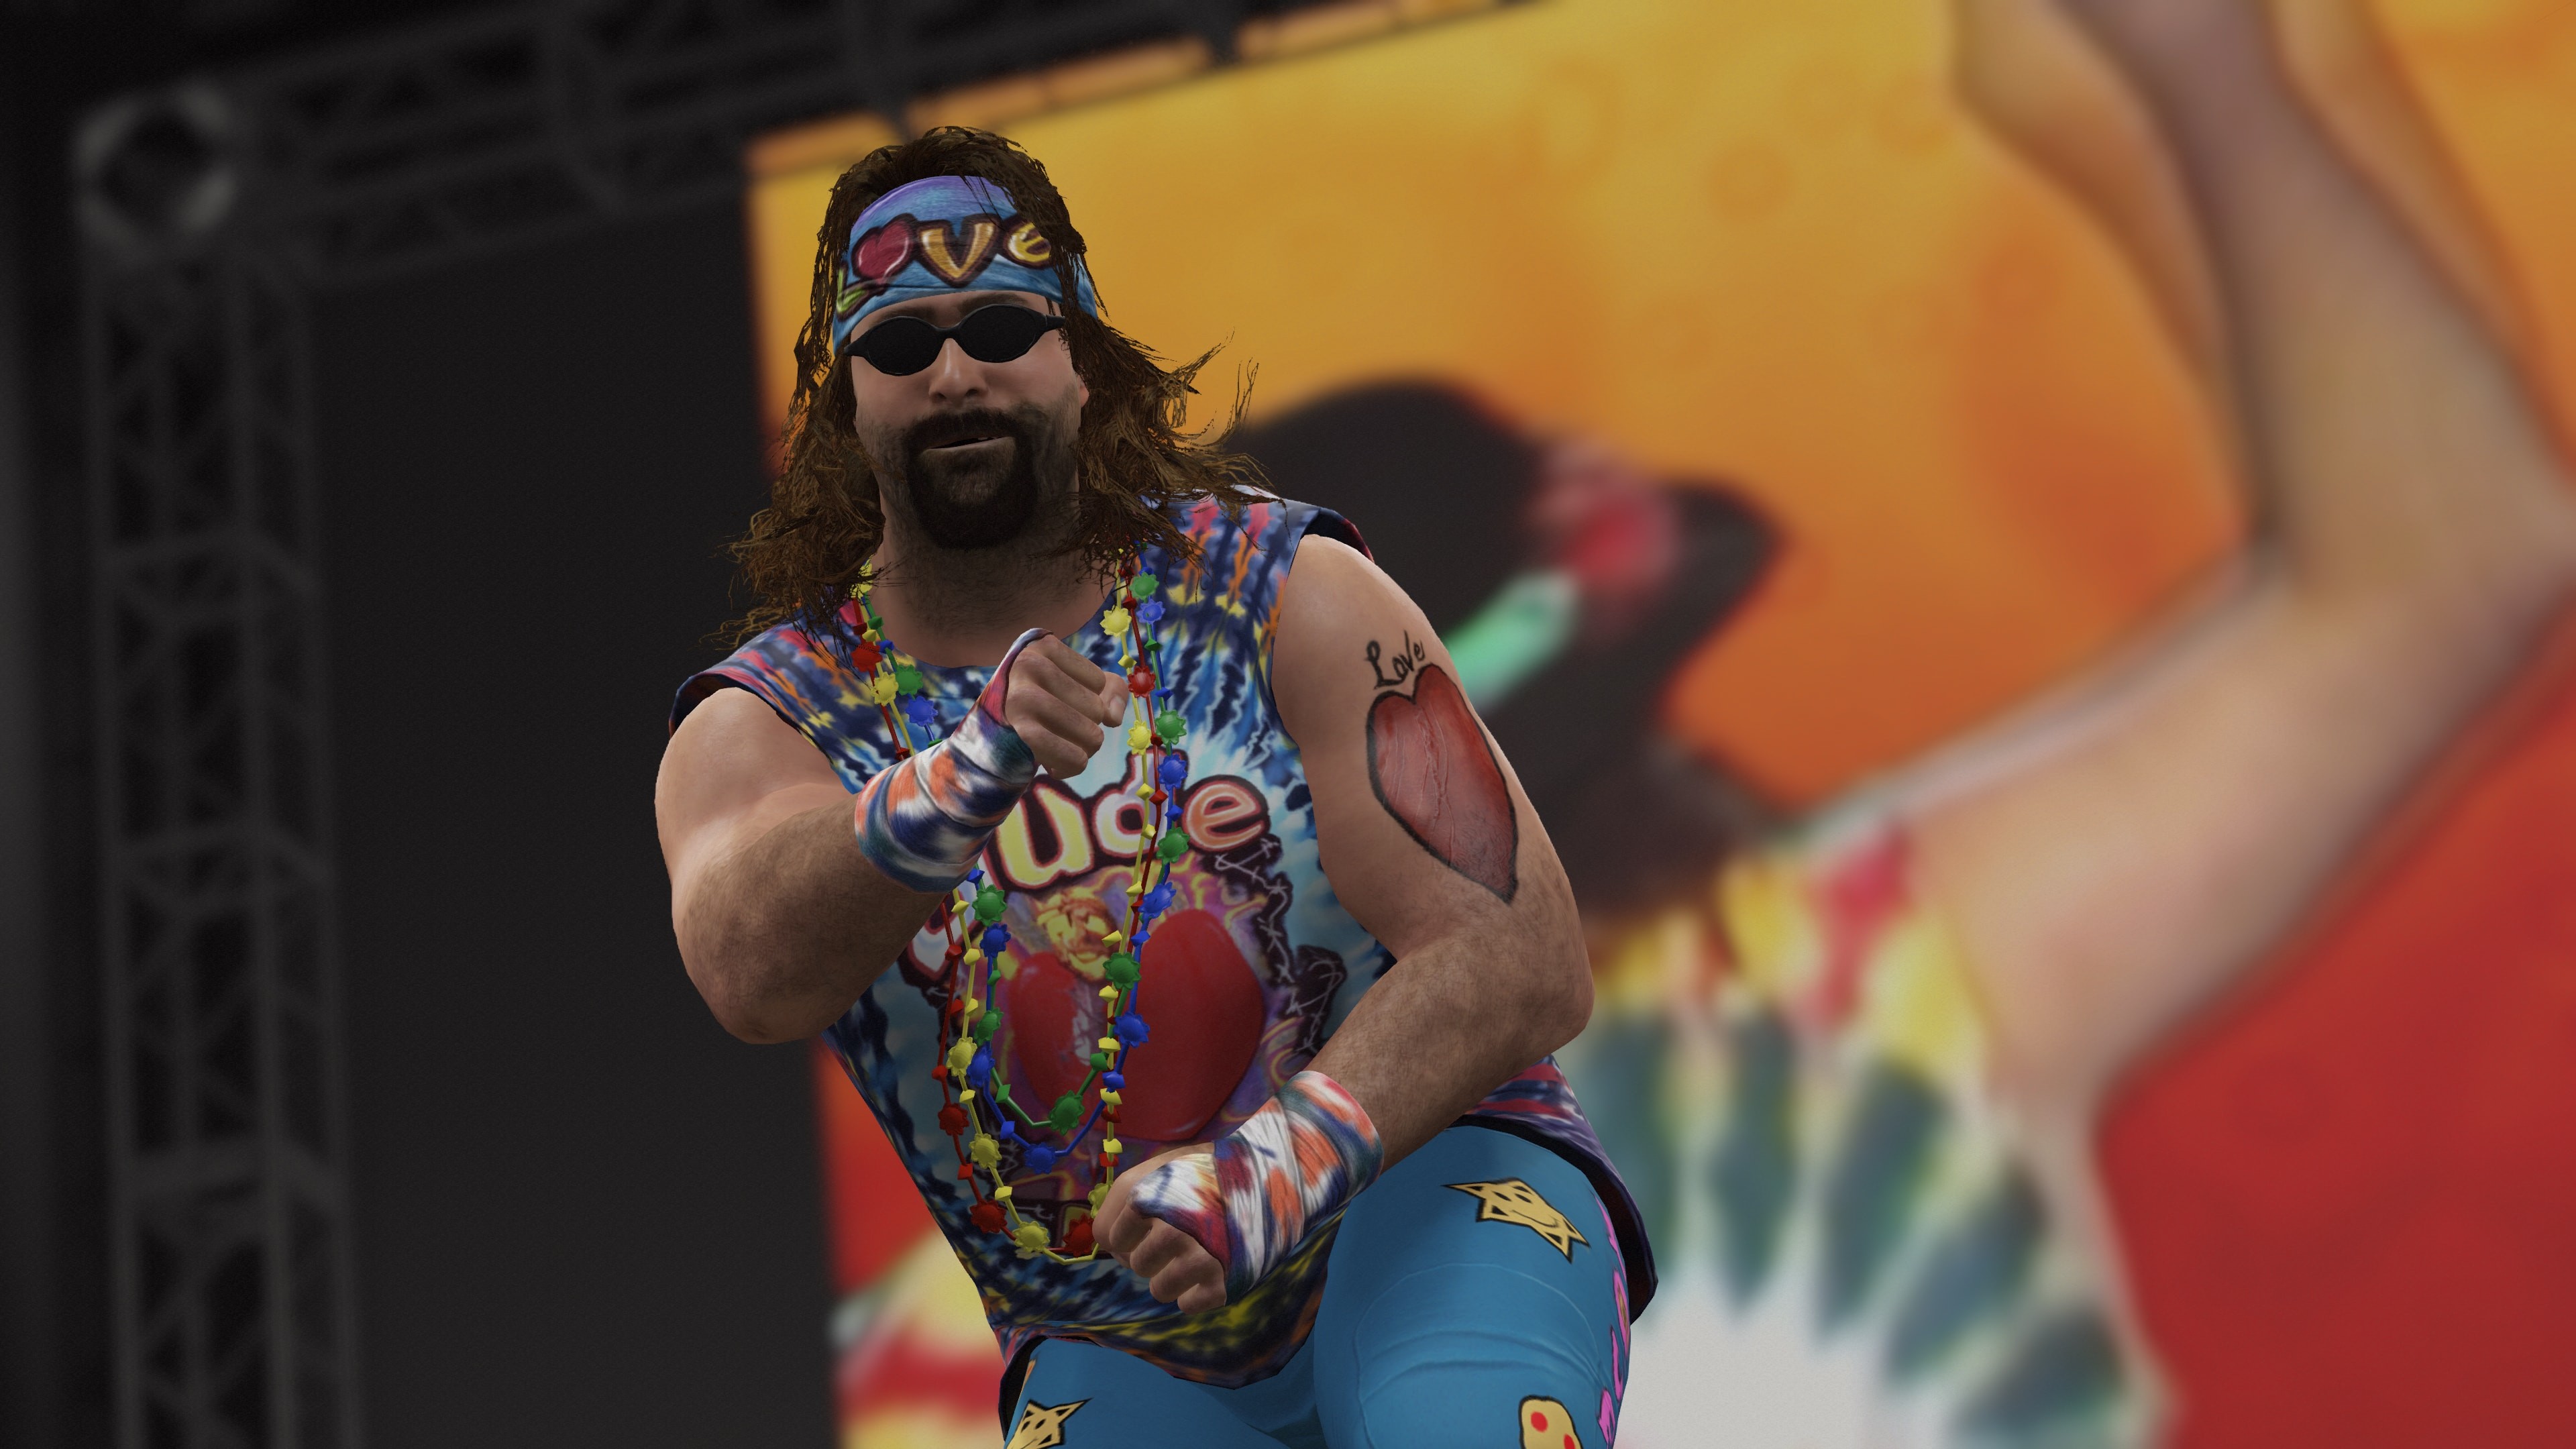 3840x2160 23 Wrestlers Added to WWE 2K16 Roster